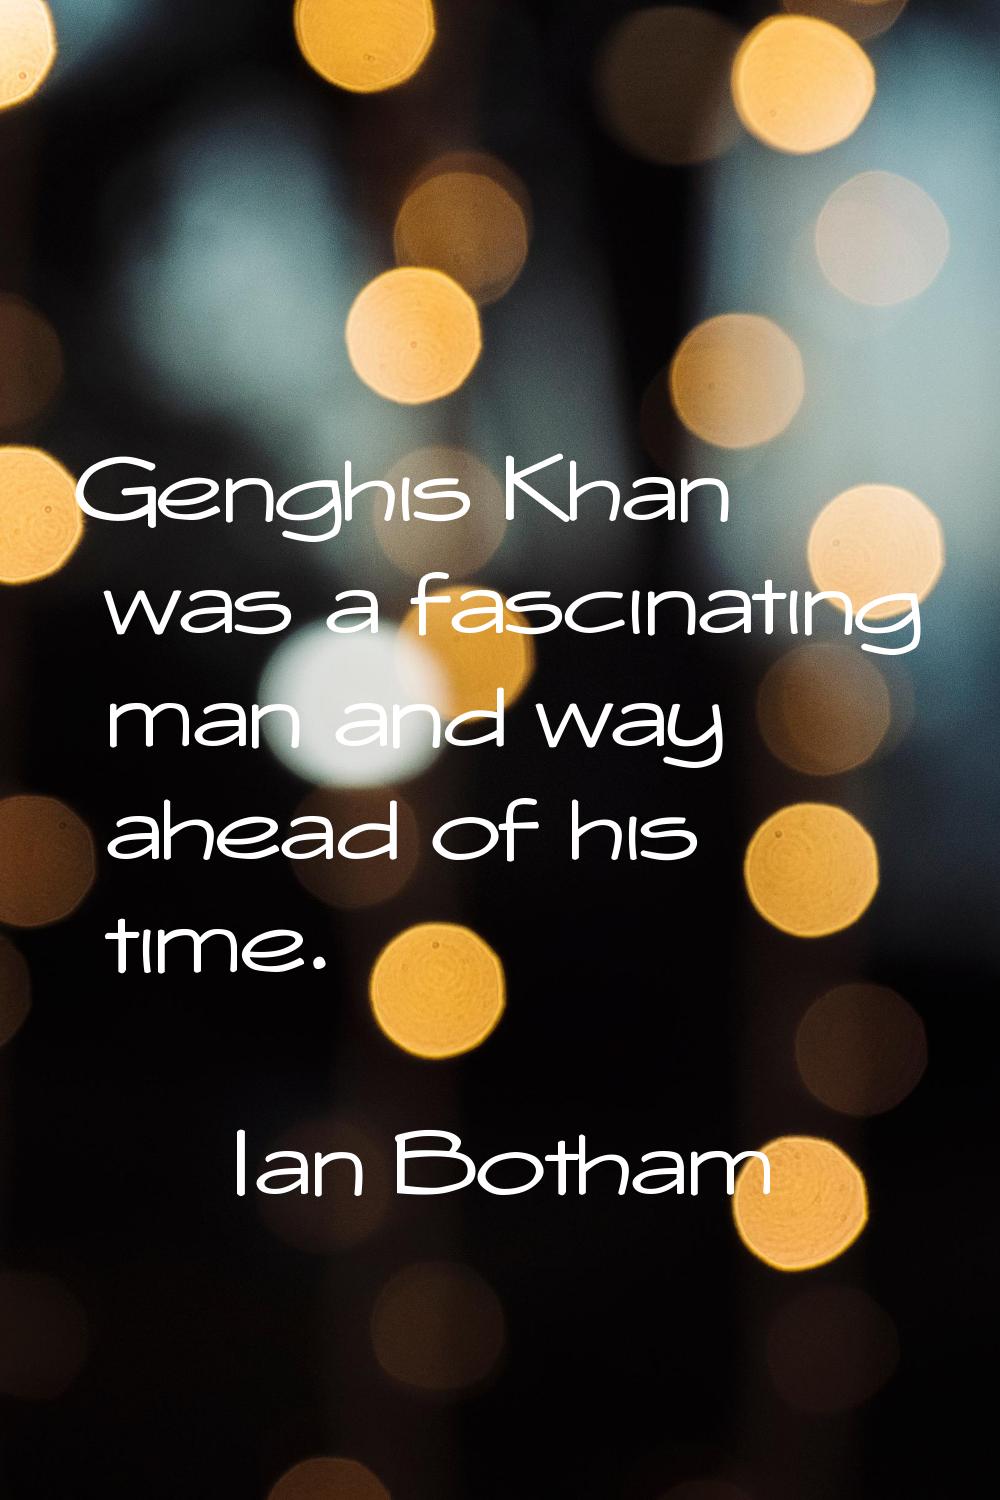 Genghis Khan was a fascinating man and way ahead of his time.